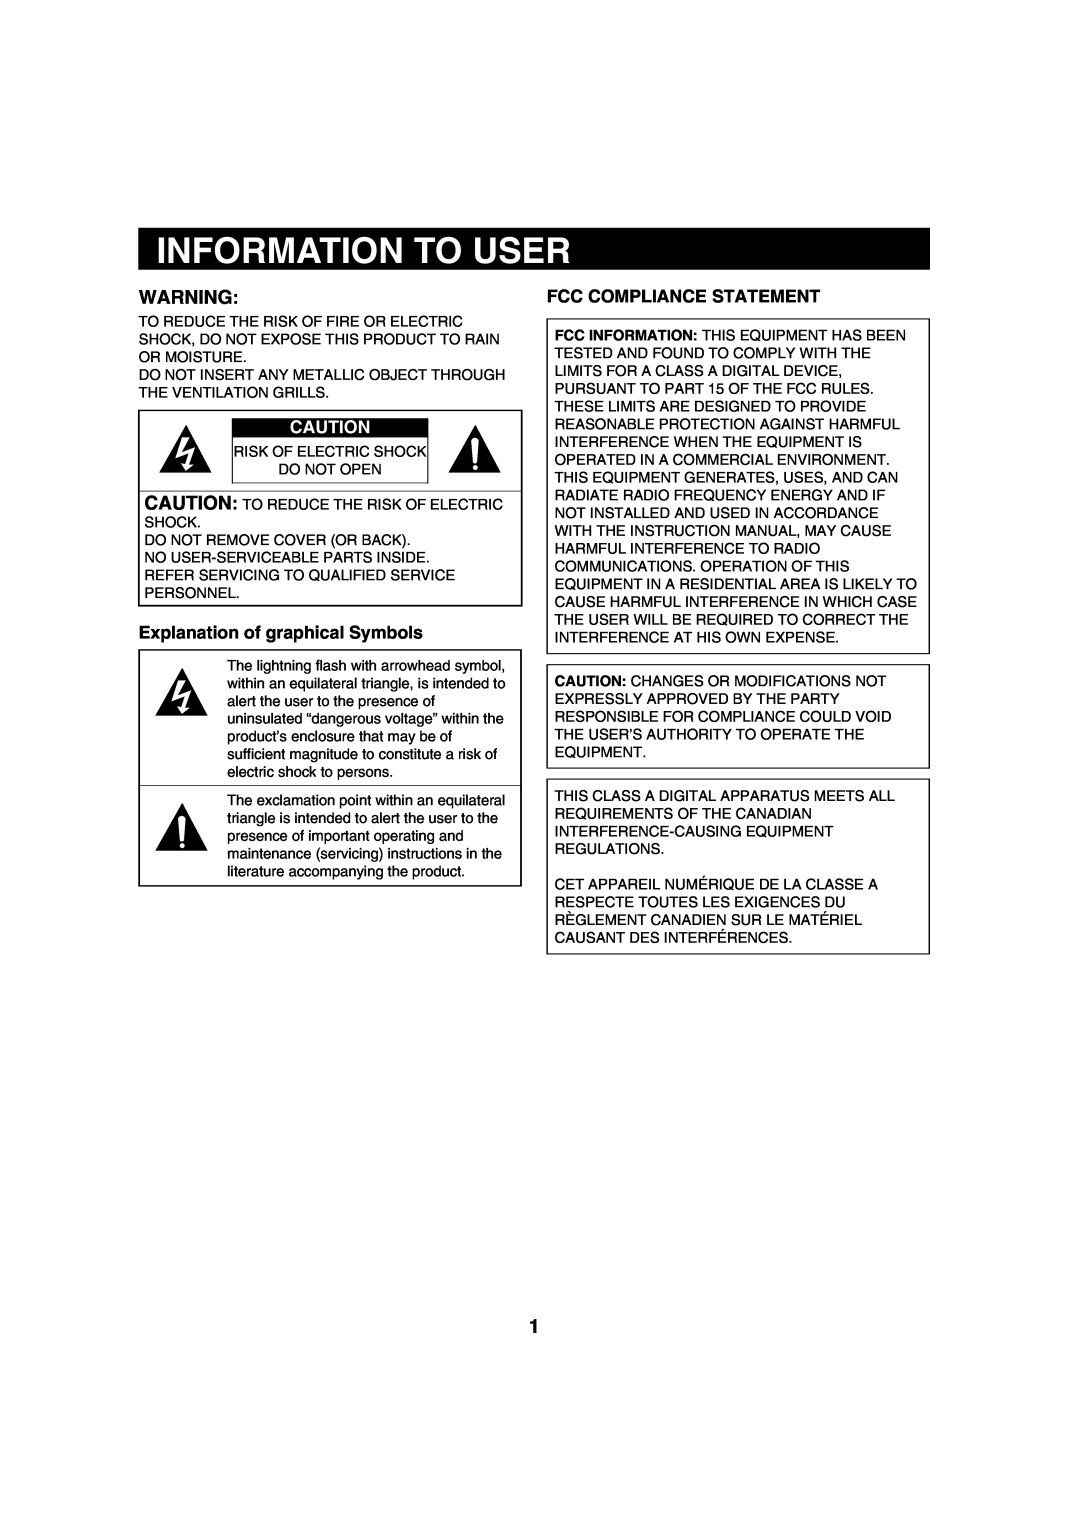 Sanyo VMC-8620 instruction manual Information To User, Explanation of graphical Symbols, Fcc Compliance Statement 